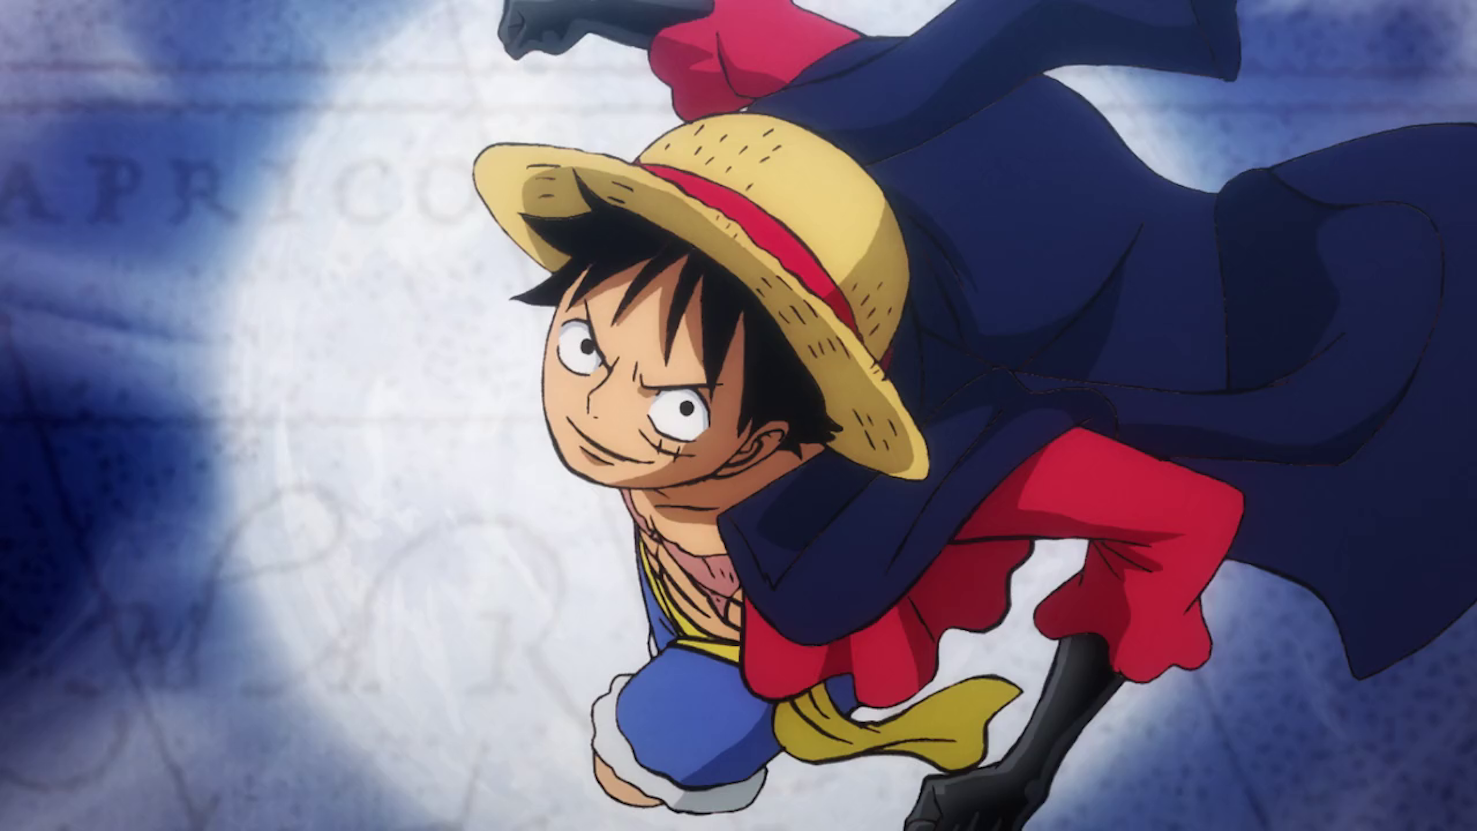 Monkey D Luffy One Piece Opening 23 0 By Princesspuccadominyo On Deviantart